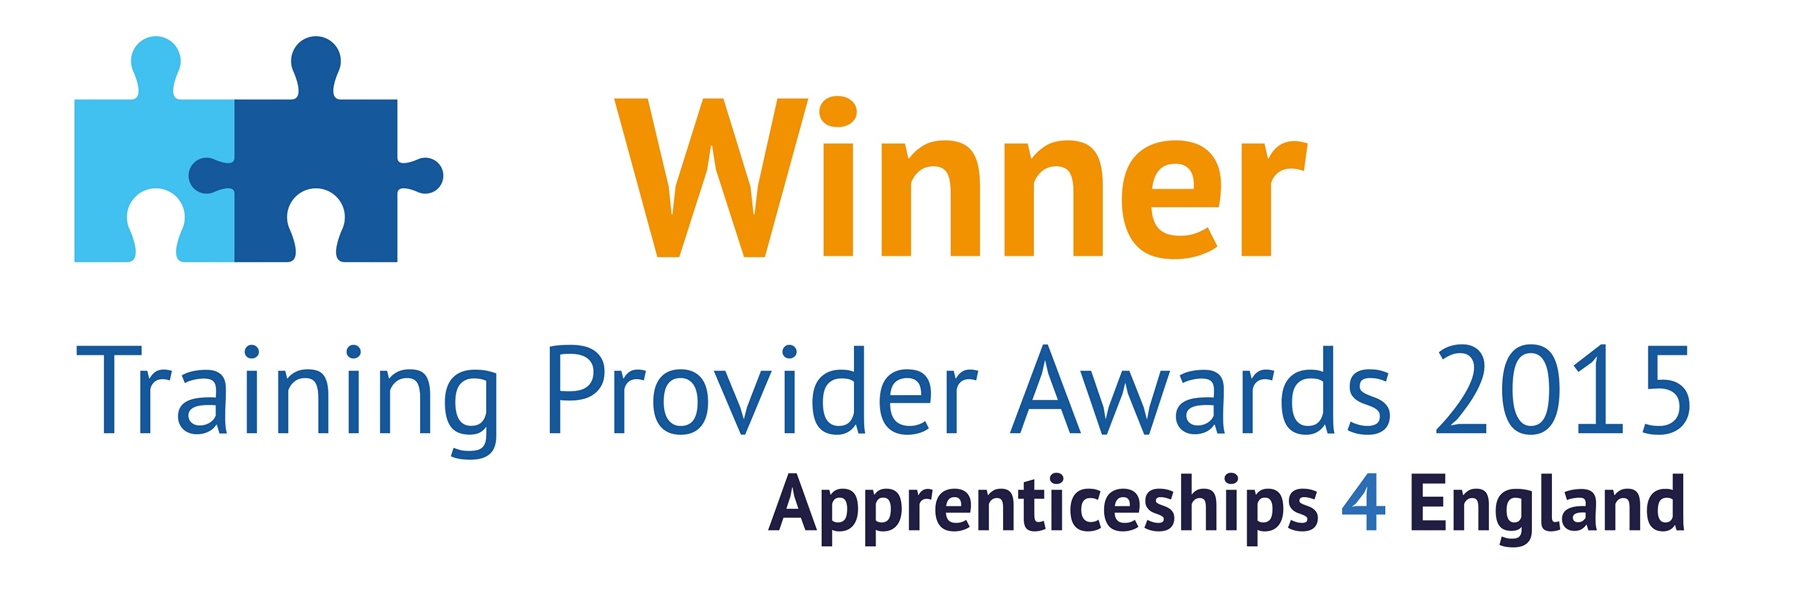 3aaa - Training Provider of the year!